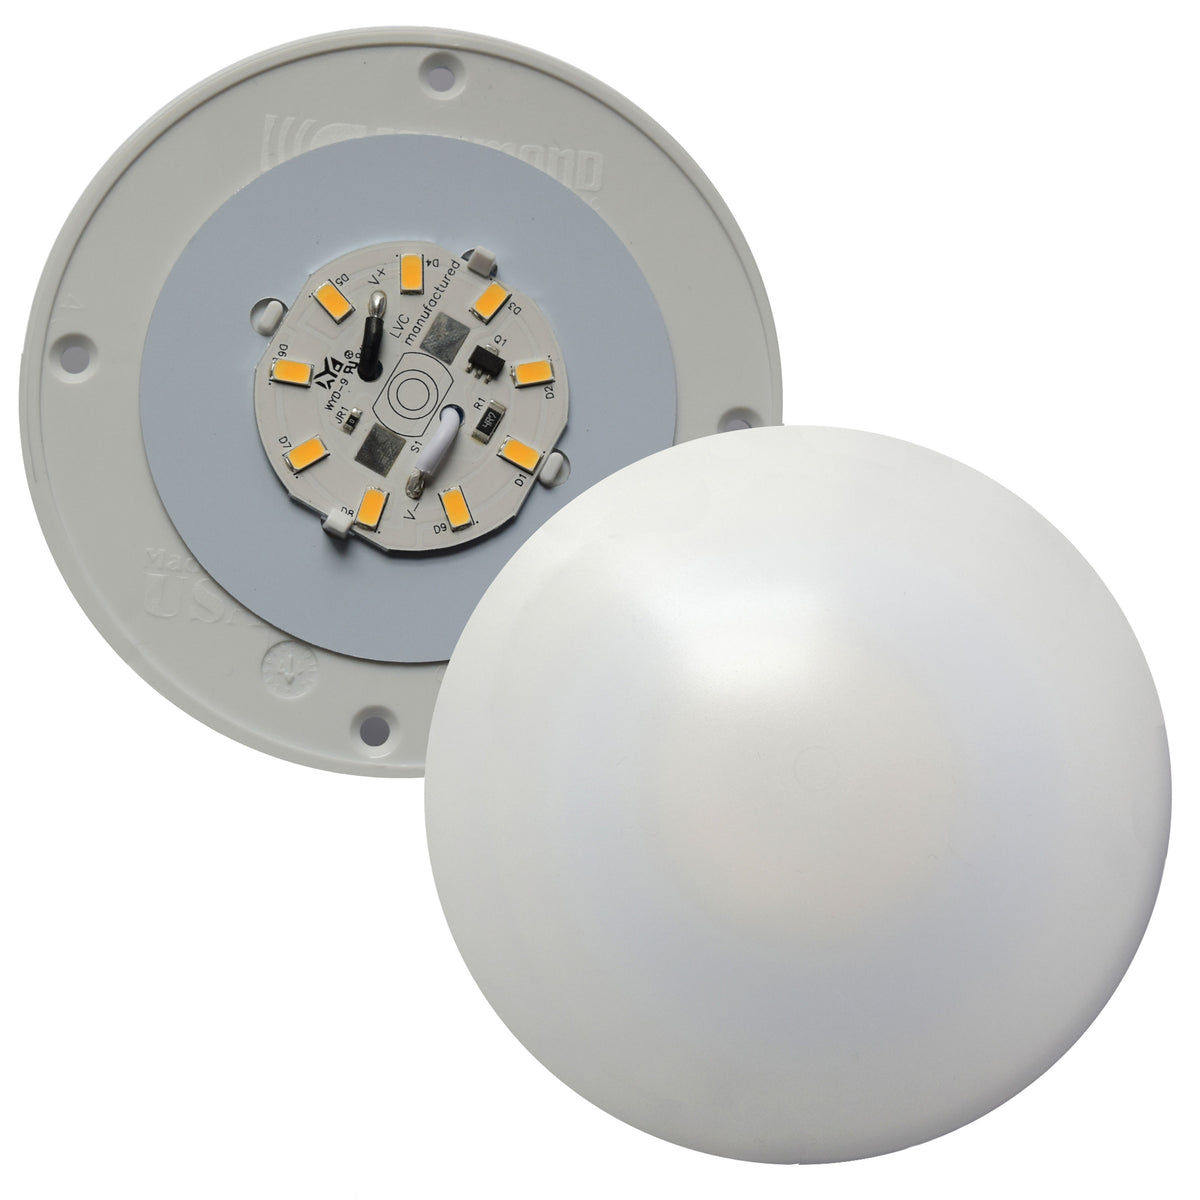 Fasteners Unlimited 001-1050 Surface Mount Round LED Ceiling Light - No Switch, 4 in. D CMD-001-1050